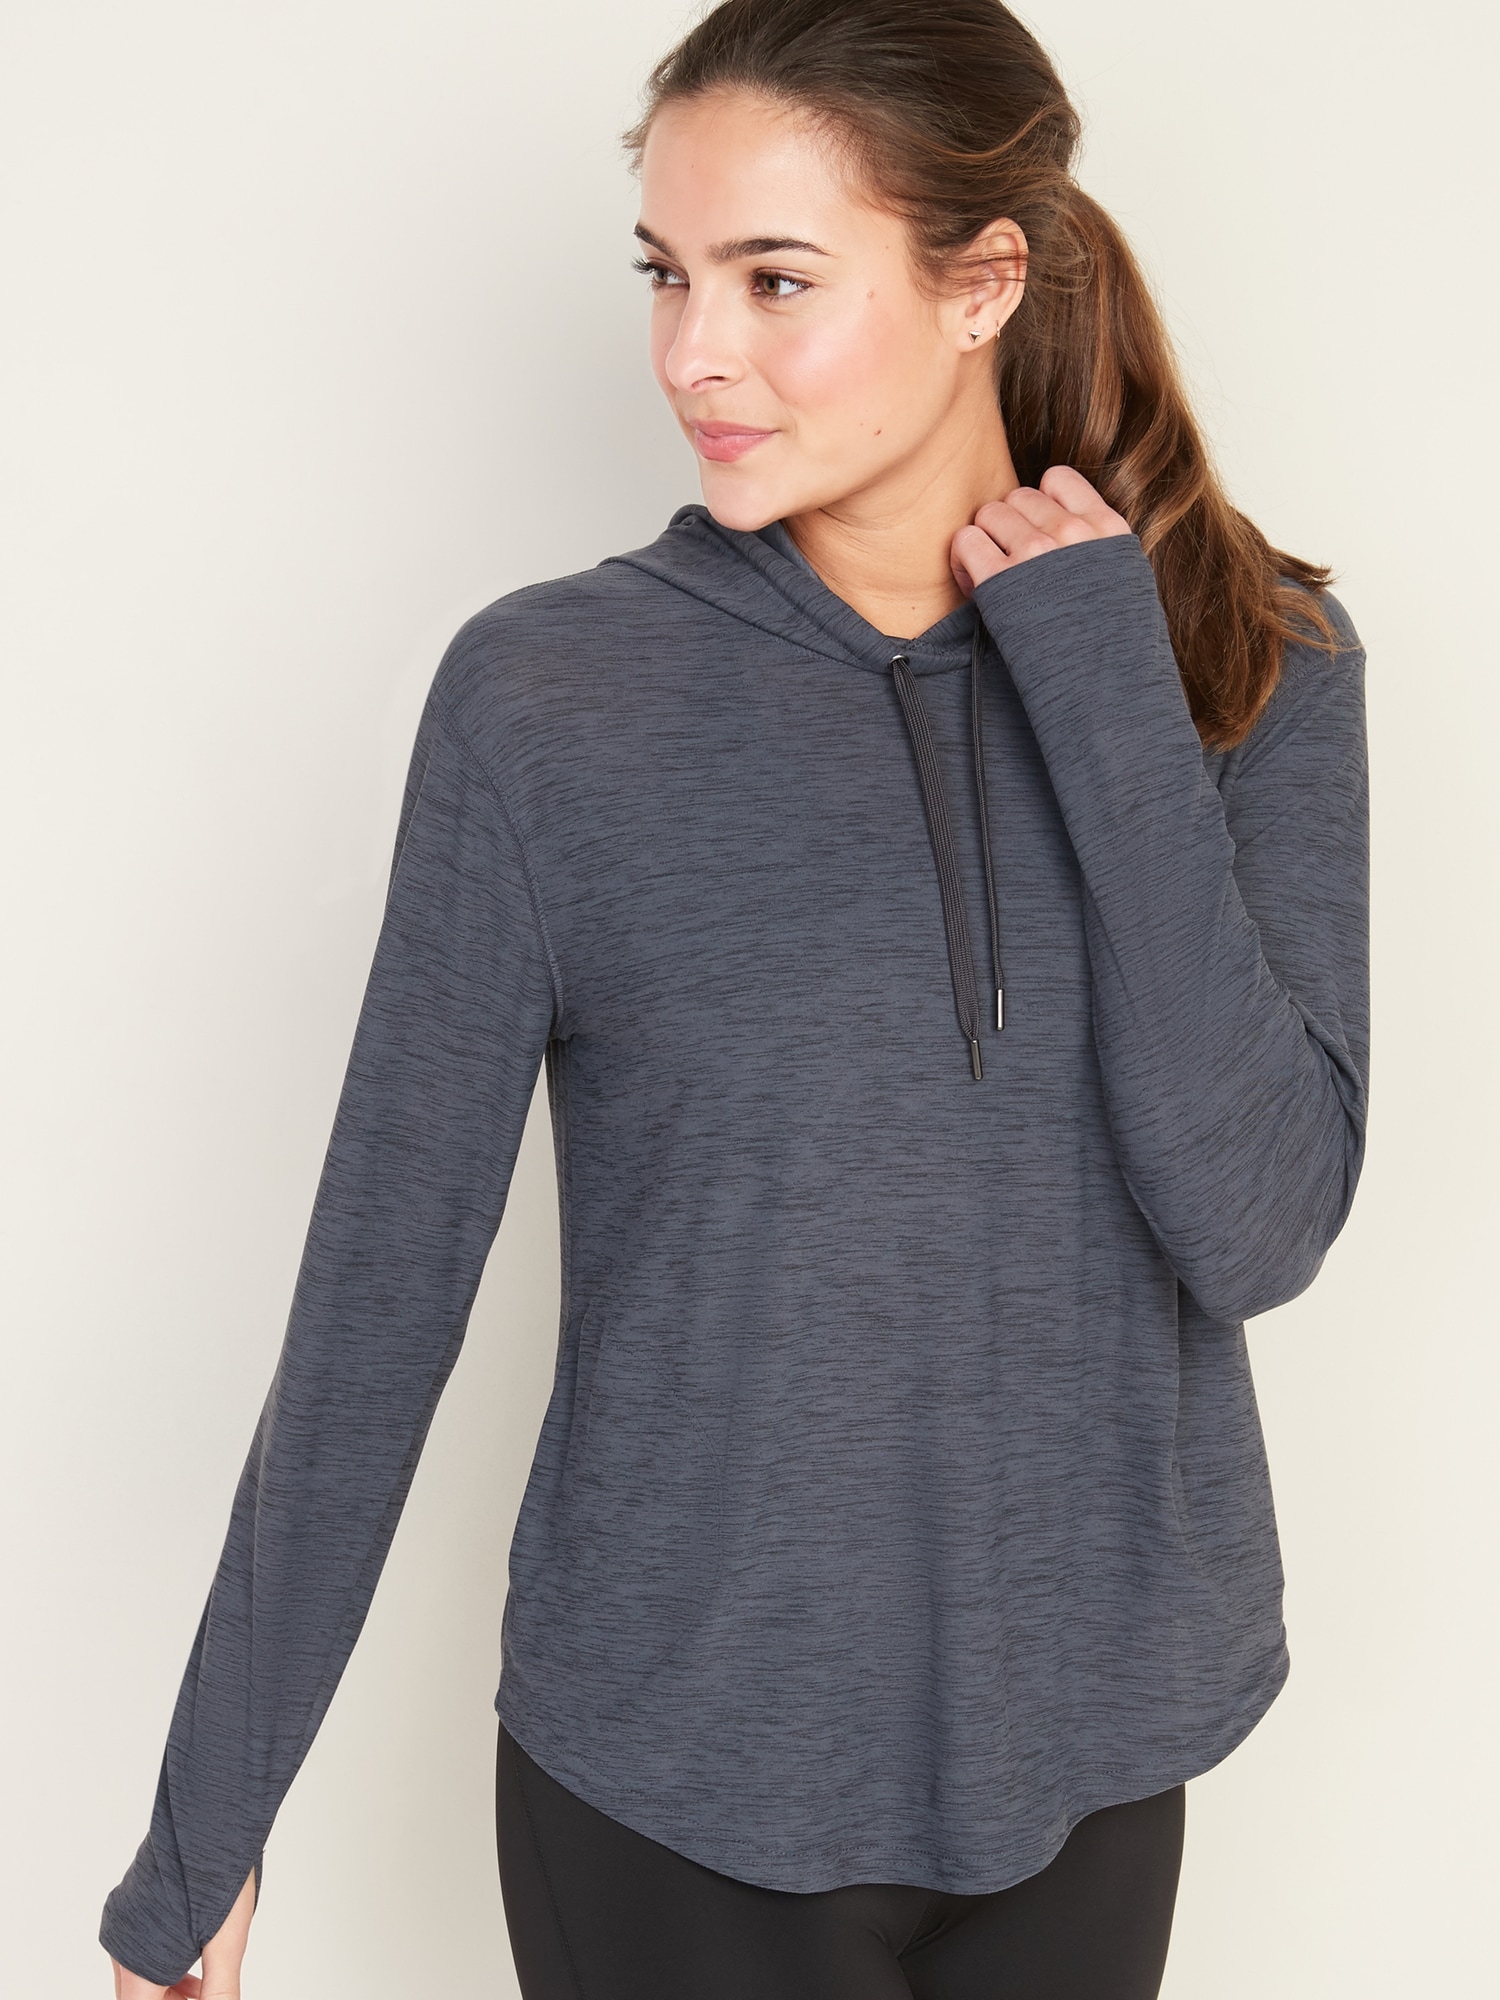 Breathe ON Pullover Hoodie for Women